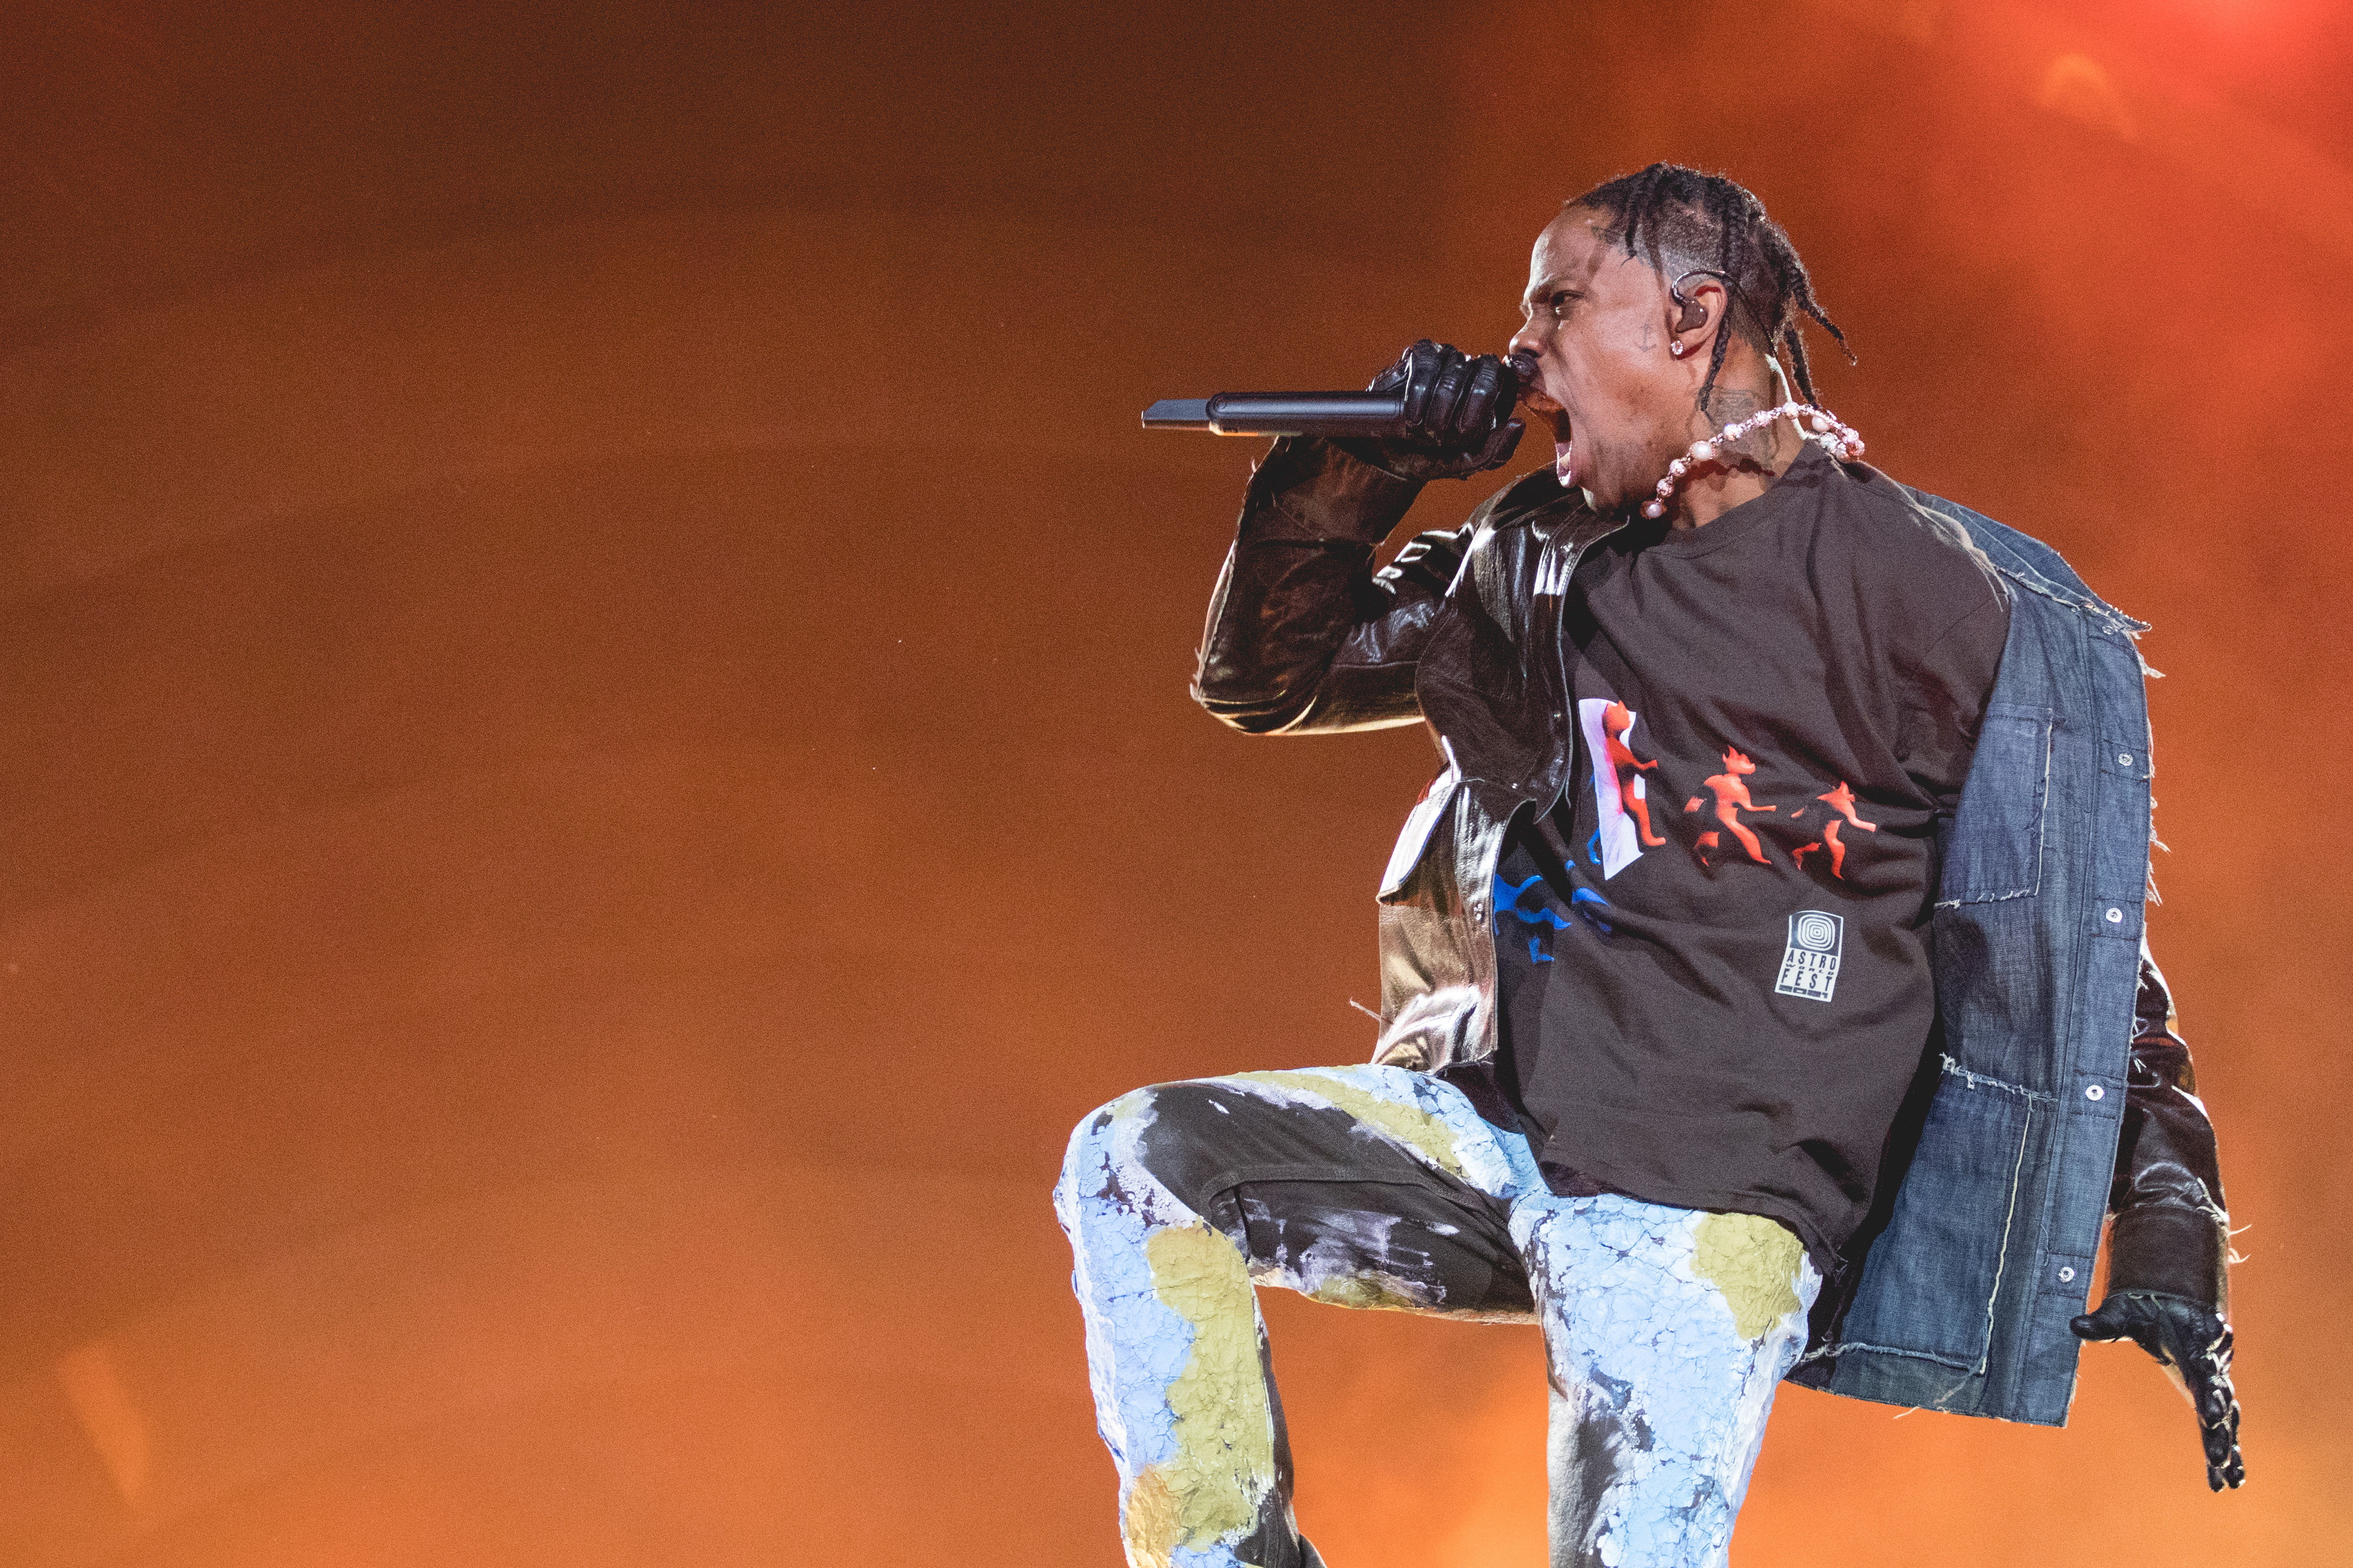 Travis Scott performs energetically on stage, wearing a graphic t-shirt, denim jacket, and distressed jeans while holding a microphone